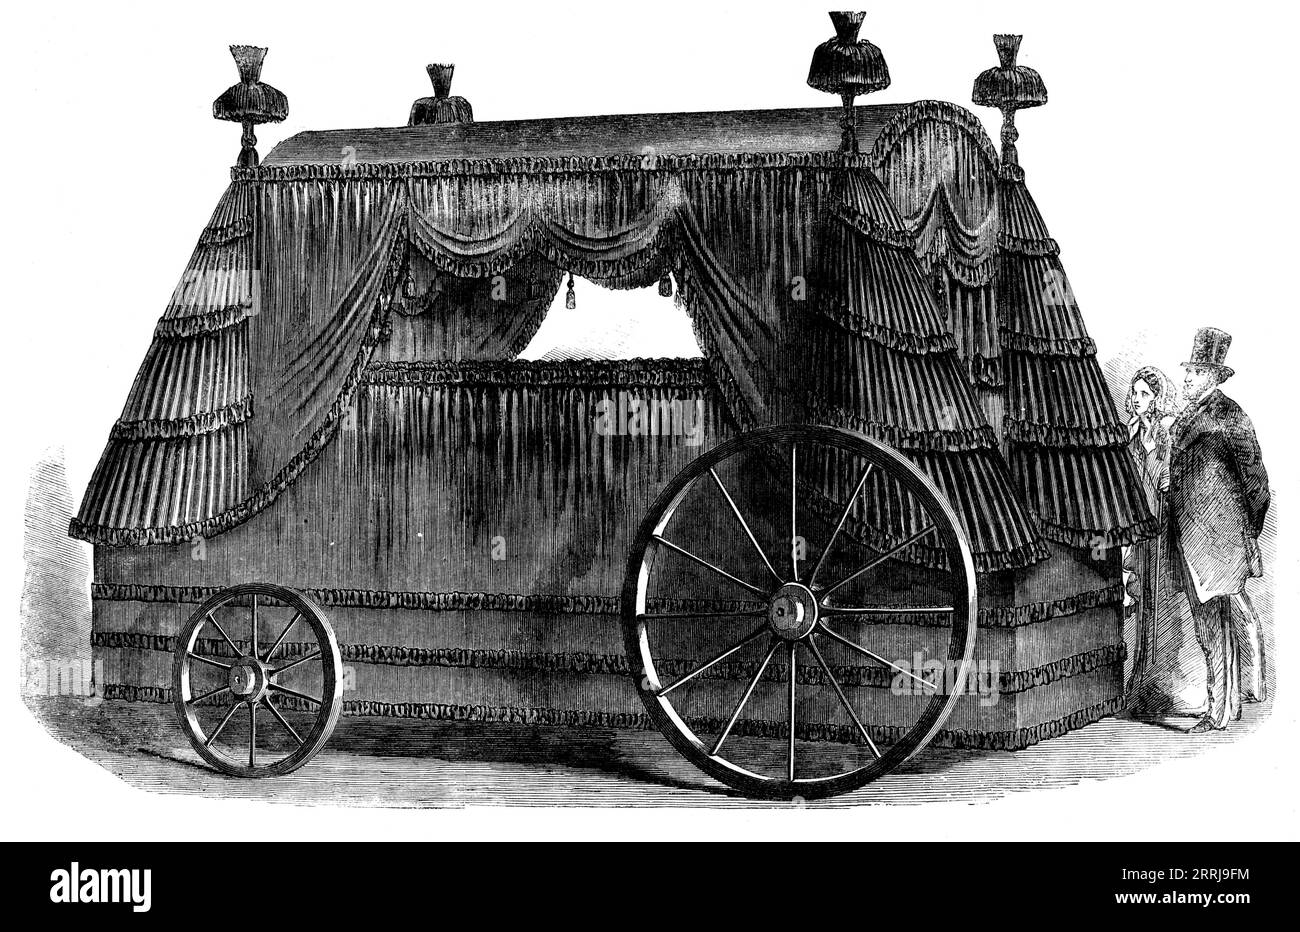 Funeral Car of Napoleon I., 1858. '...a most interesting relic...namely, the hearse in which was conveyed the body of the Imperial exile to St. Helena to the tomb in 1821. The funeral car consists of the lower portion of the carriage used by Napoleon in his solitary rambles over the rugged roads of the island, and which, at his desire, was transformed into his funeral bier...The French Government having expressed a wish to possess all relics appertaining to the last days of Napoleon, application was made...to have the car presented to the French nation...But such was the injury the car had sus Stock Photo